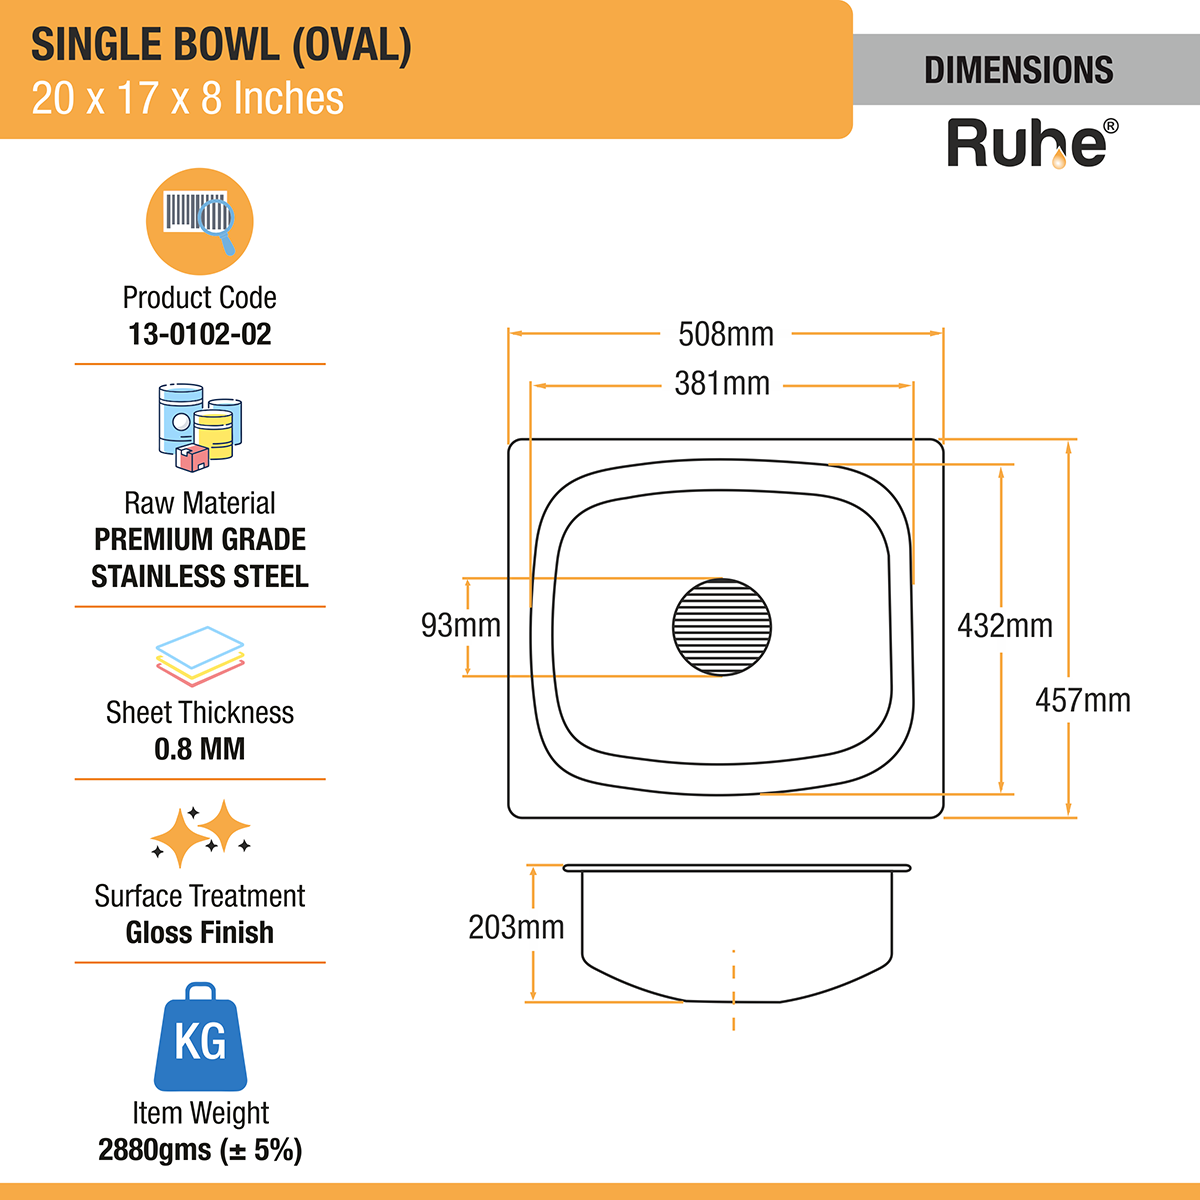 Oval Single Bowl (20 x 17 x 8 inches) Kitchen Sink dimensions and sizes